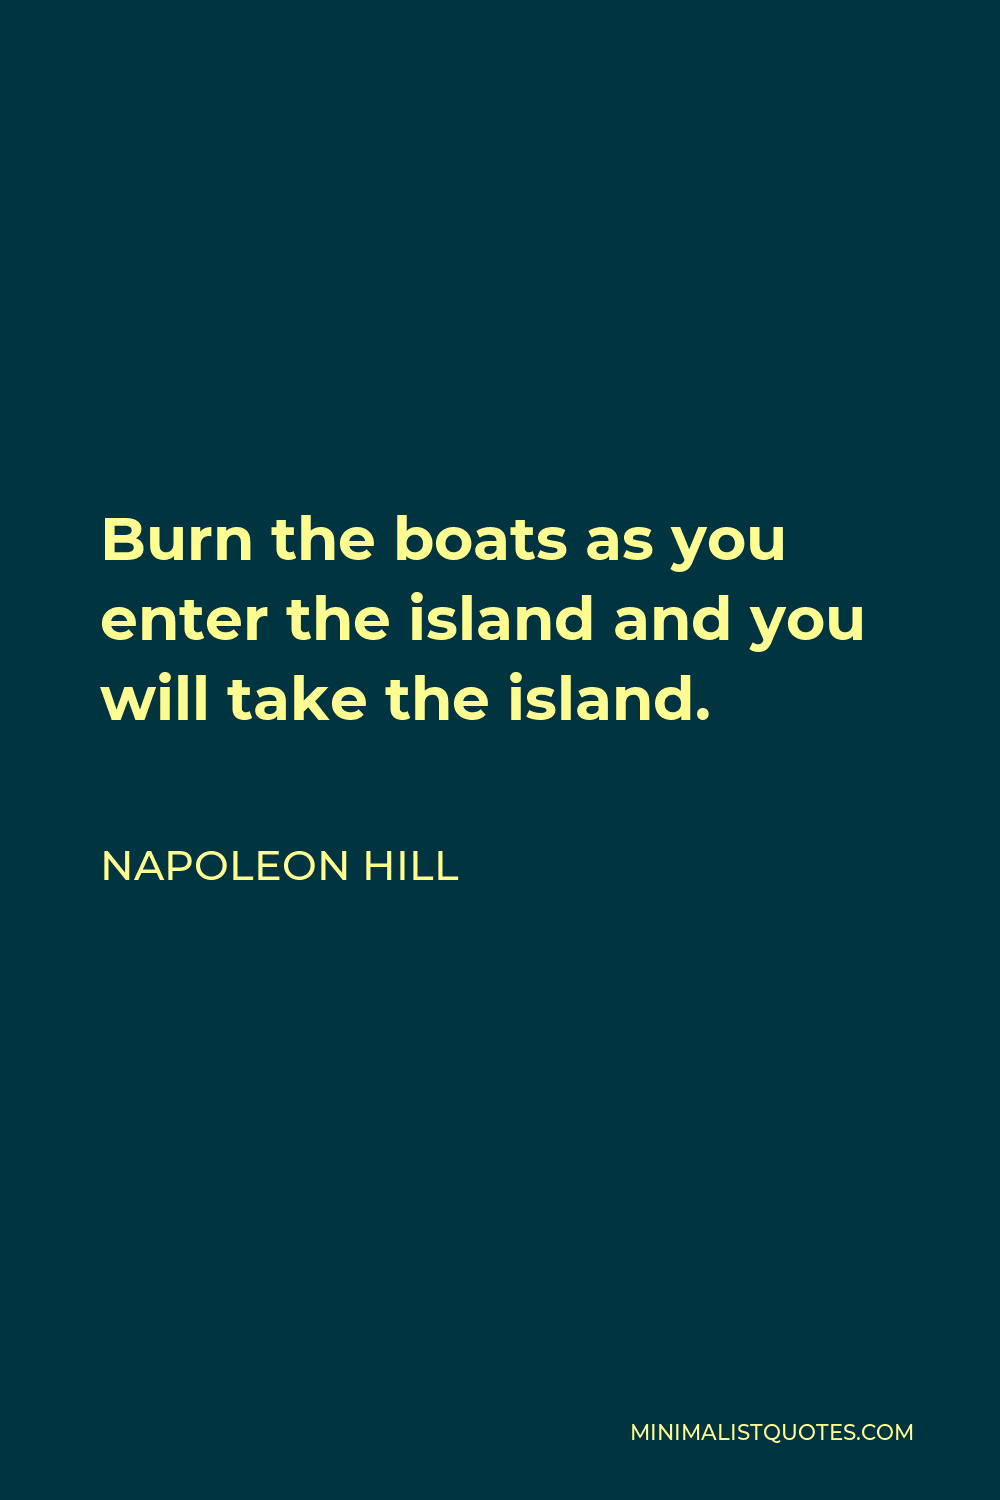 Napoleon Hill Quote - Burn the boats as you enter the island and you will take the island.